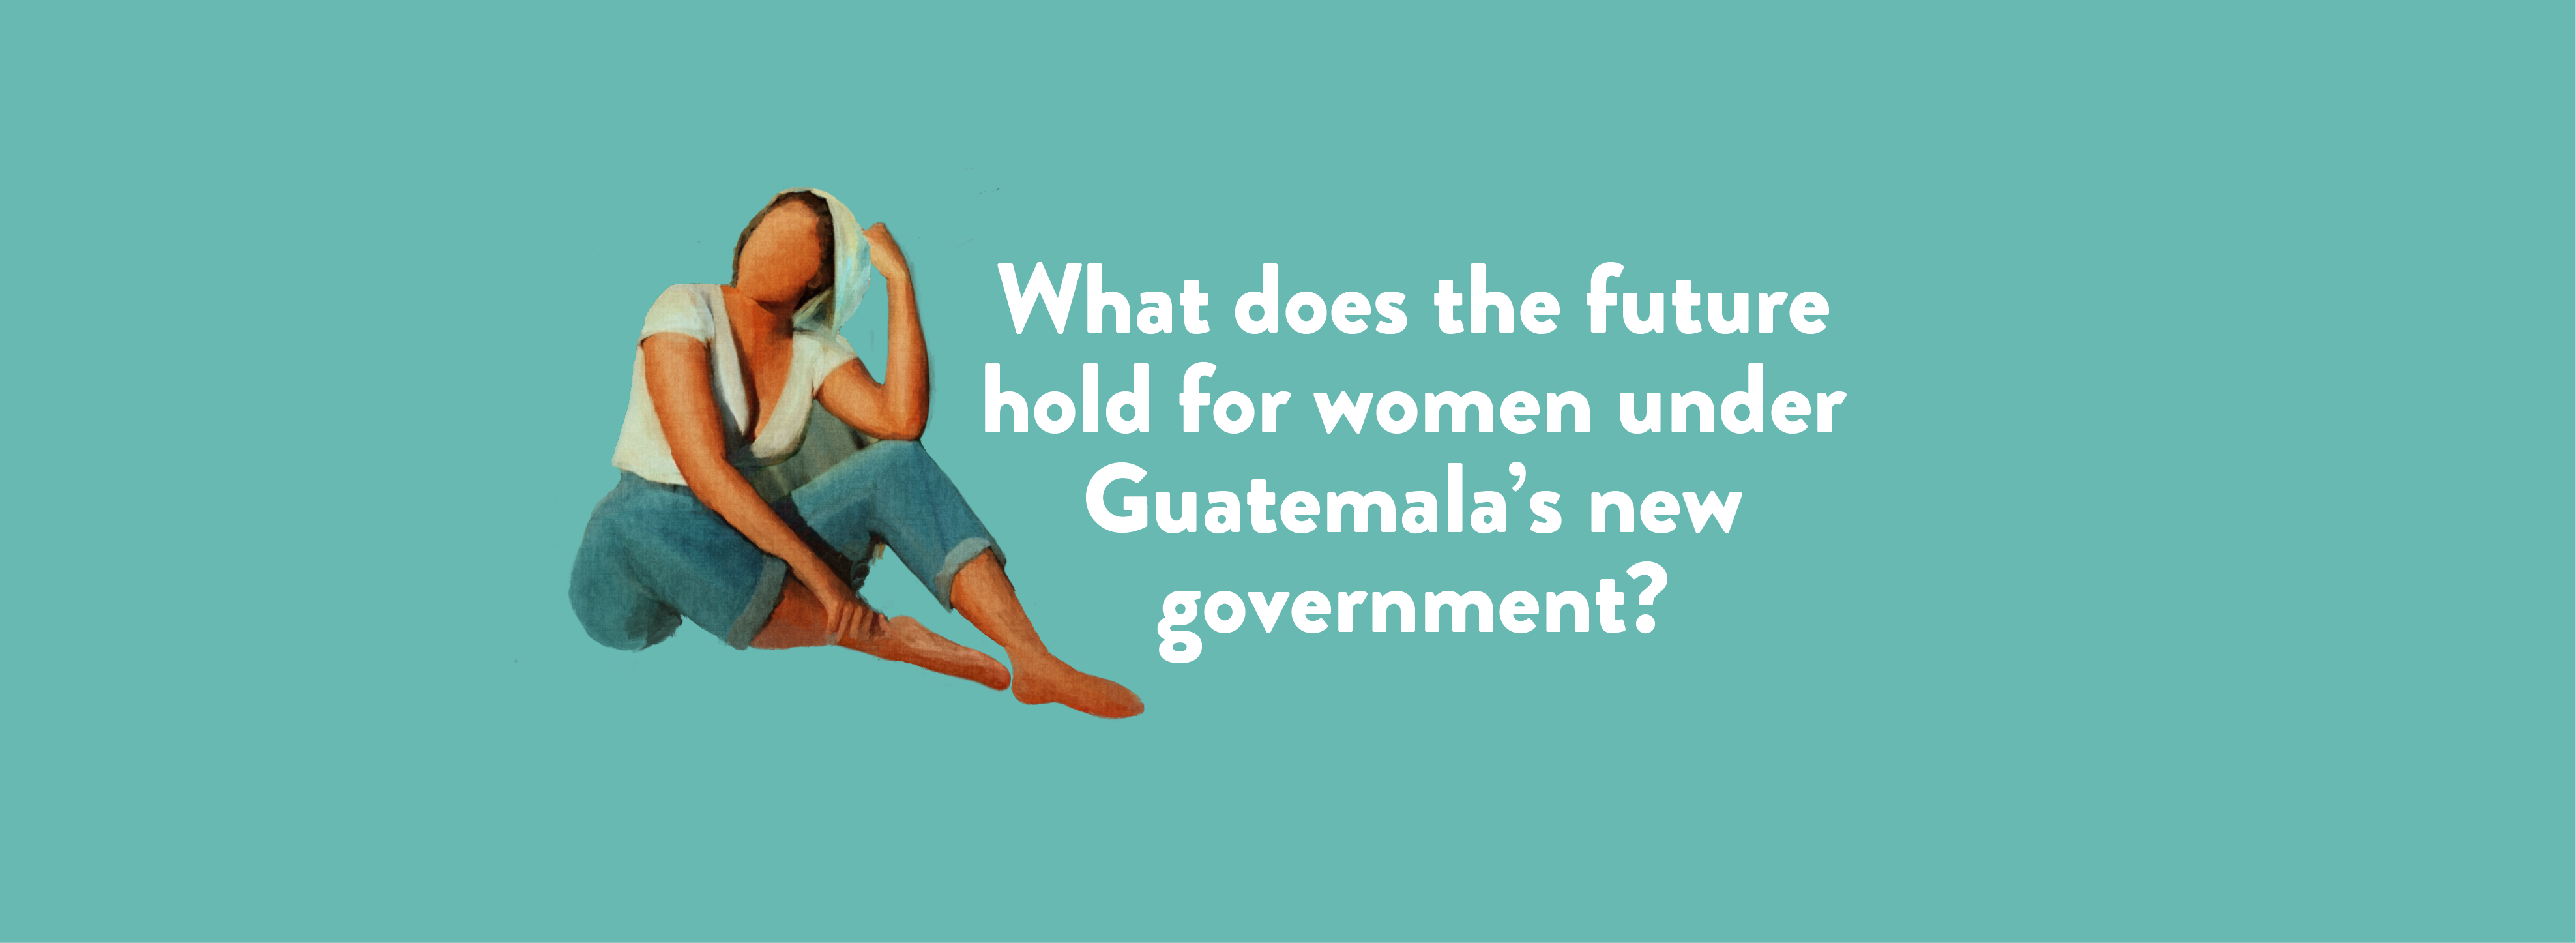 What does the future hold for women under Guatemala’s new government?